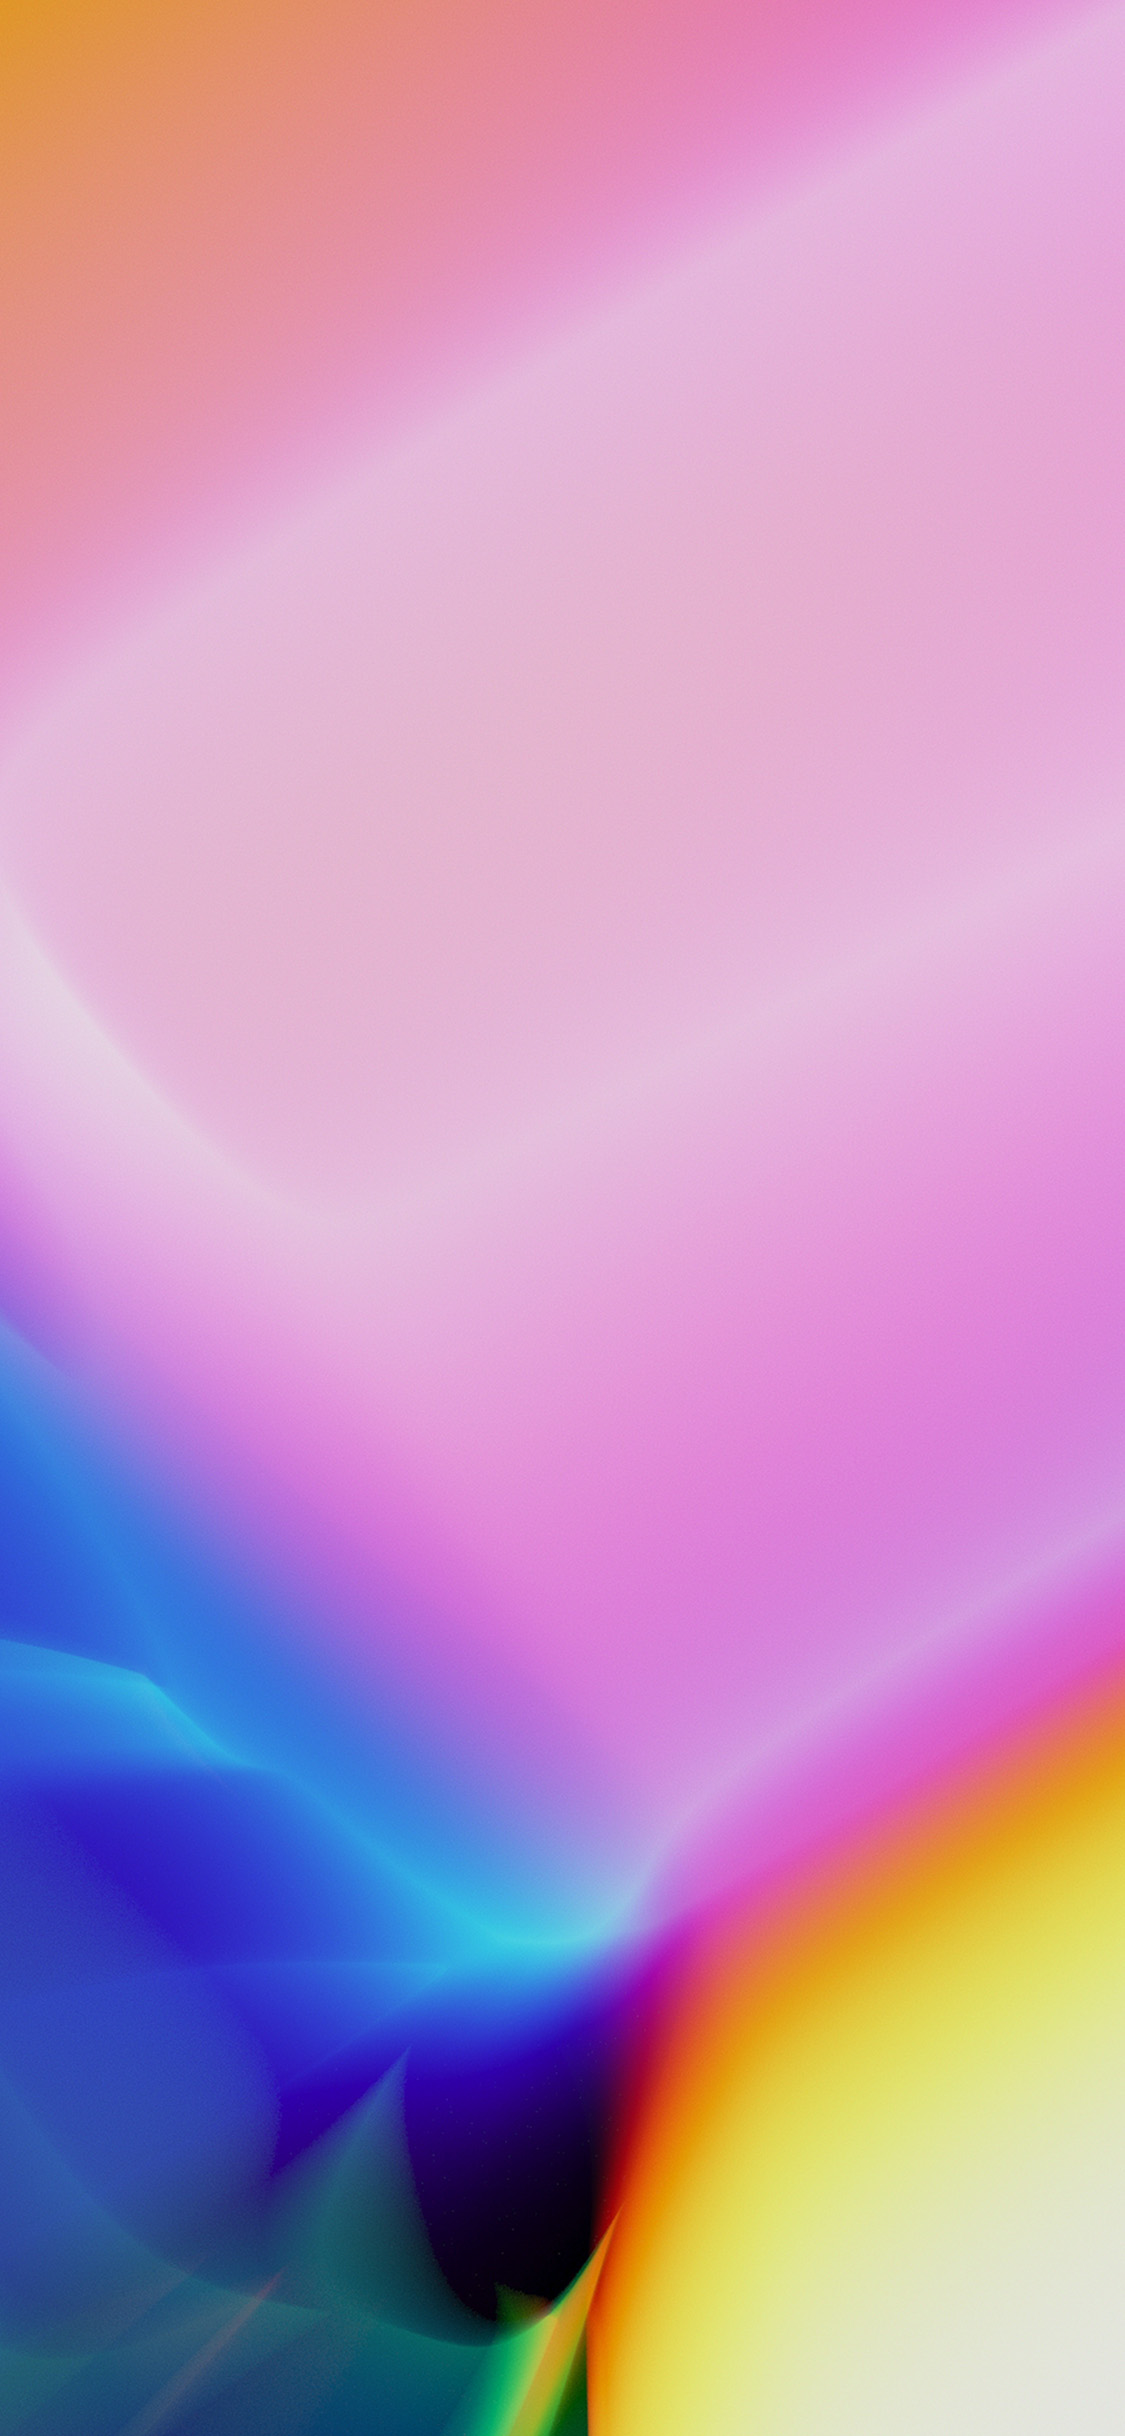 Download these color spectrum wallpapers for iPhone